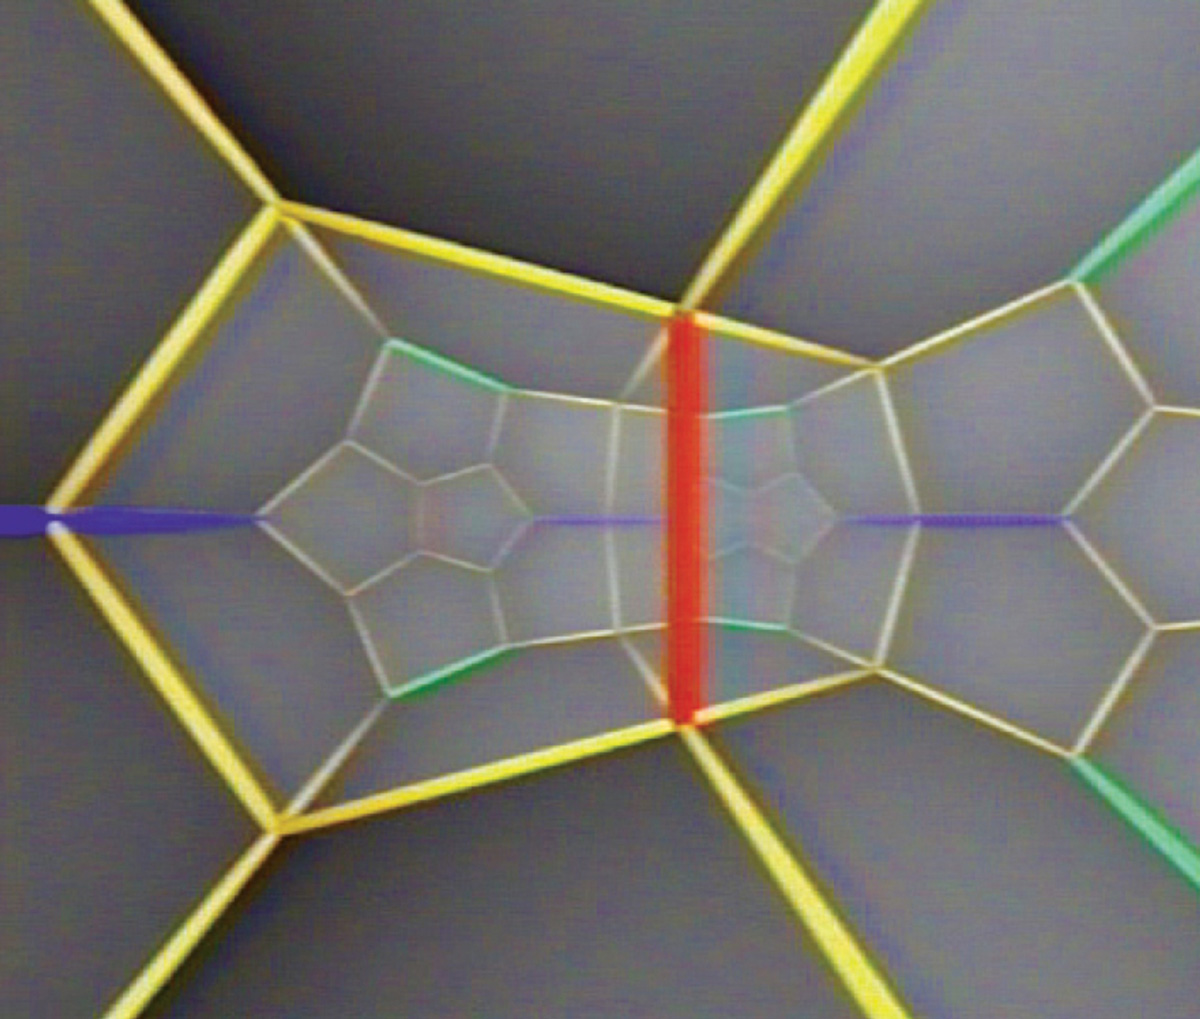 Still from David Epstein and Charlie Gunn‘s nineteen ninety educational video “Not Knot” exploring the complexities of Borromean space.